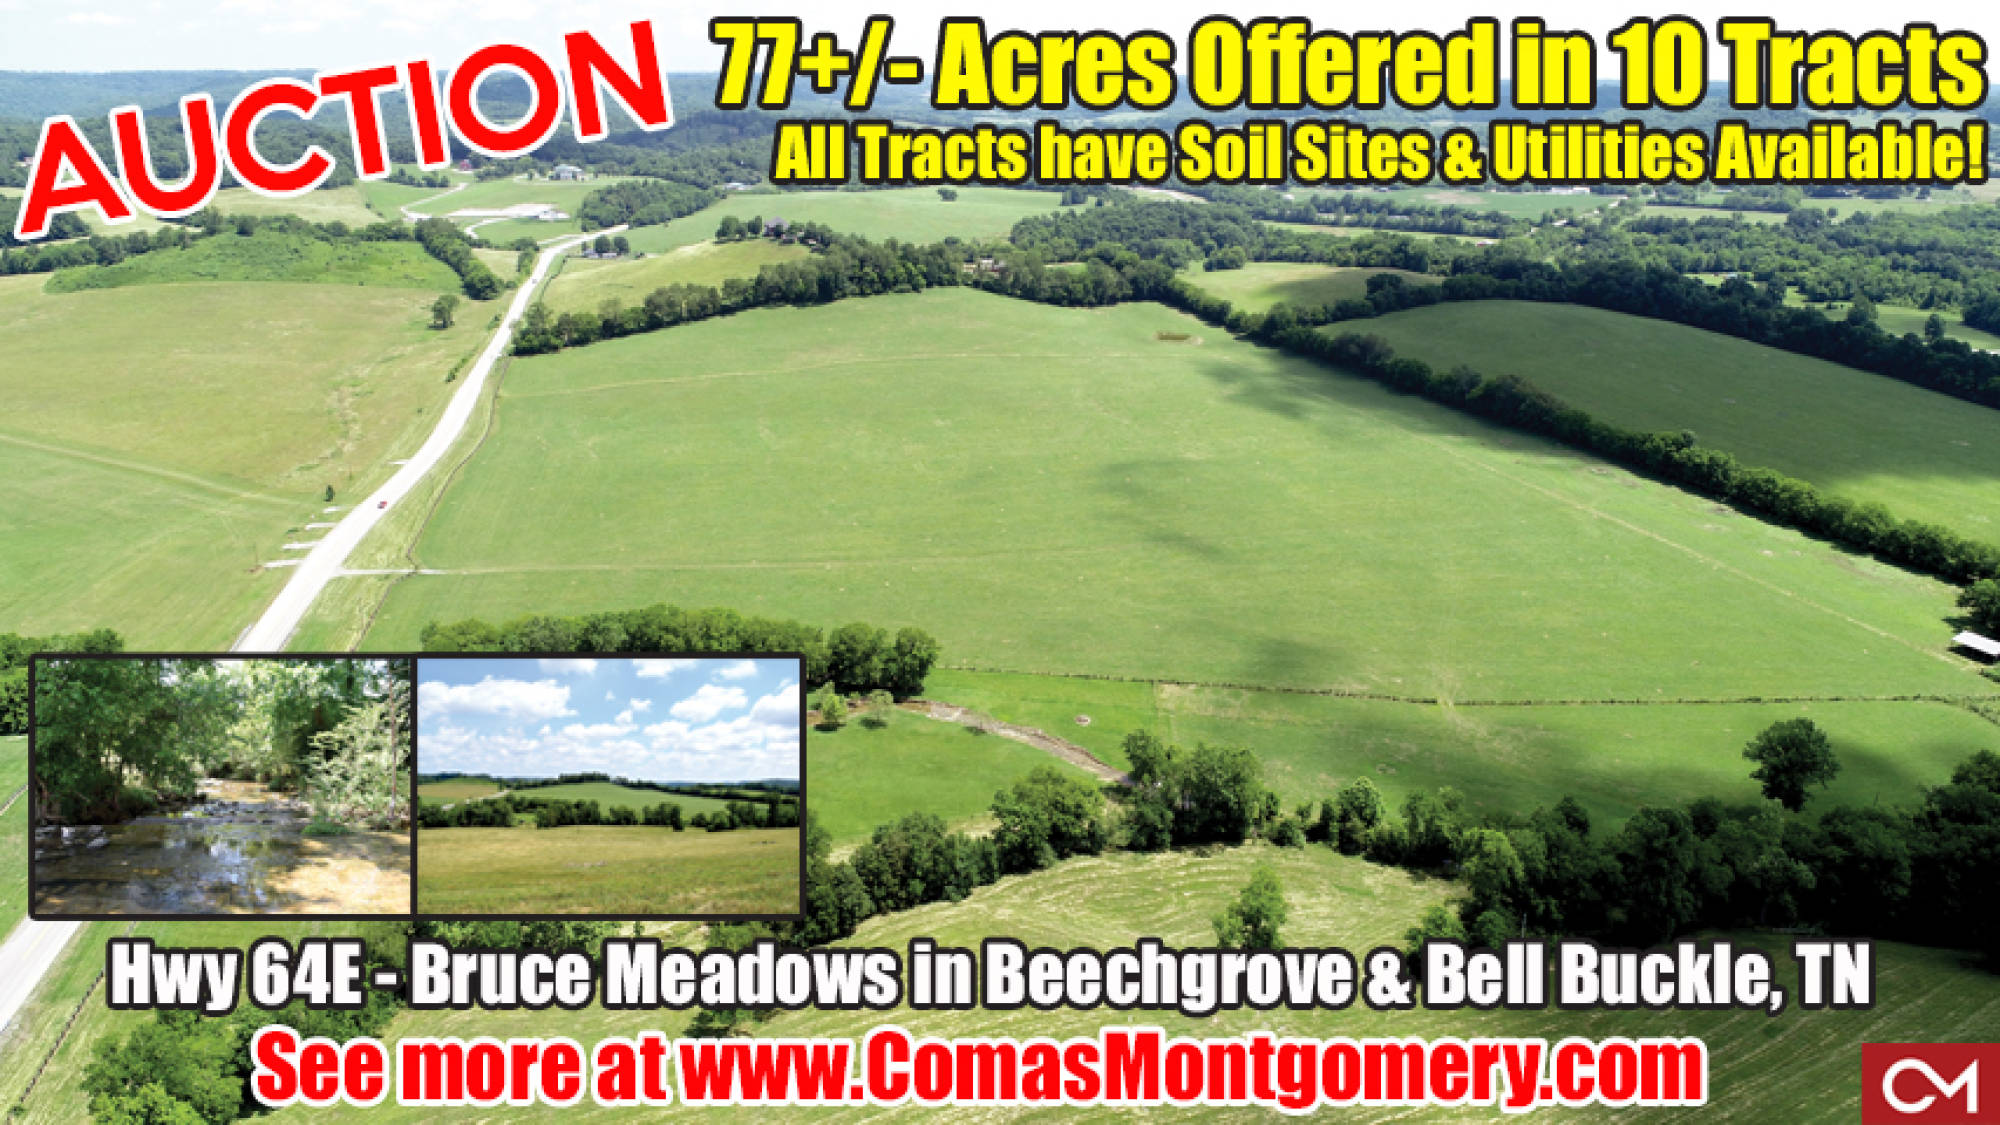 Land, Tracts, Acres, Beechgrove, Bell Buckle, Webb School, Real Estate, For Sale, Auction, Tennessee, Comas, Montgomery, Creek, Pond, Barn, Pasture